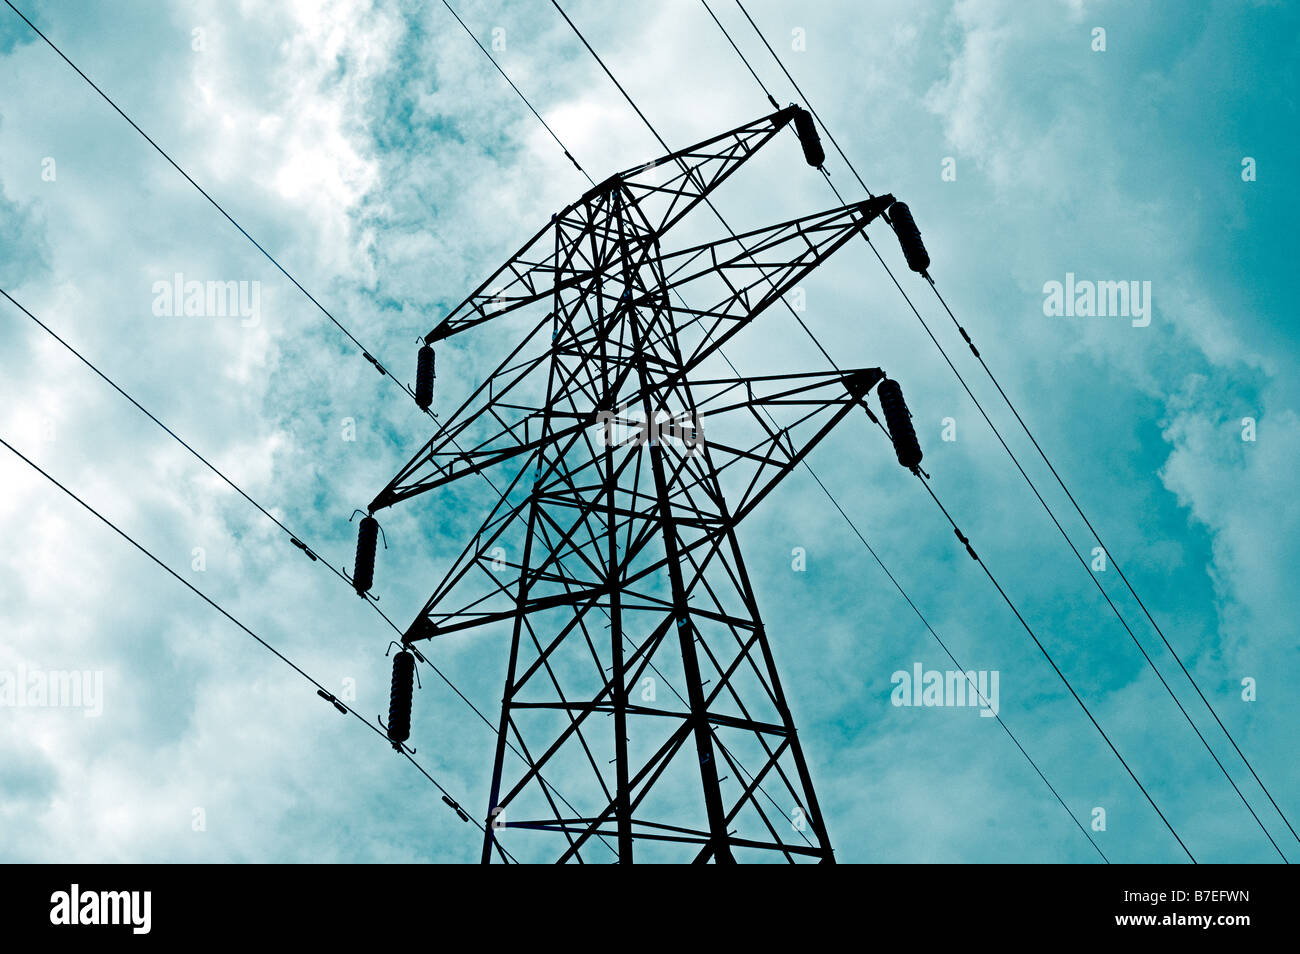 ELECTRICAL POWER PYLON WITH SUPPLY CABLES OR LINES AGAINST A CLOUDY SKY ELECTRIC Stock Photo